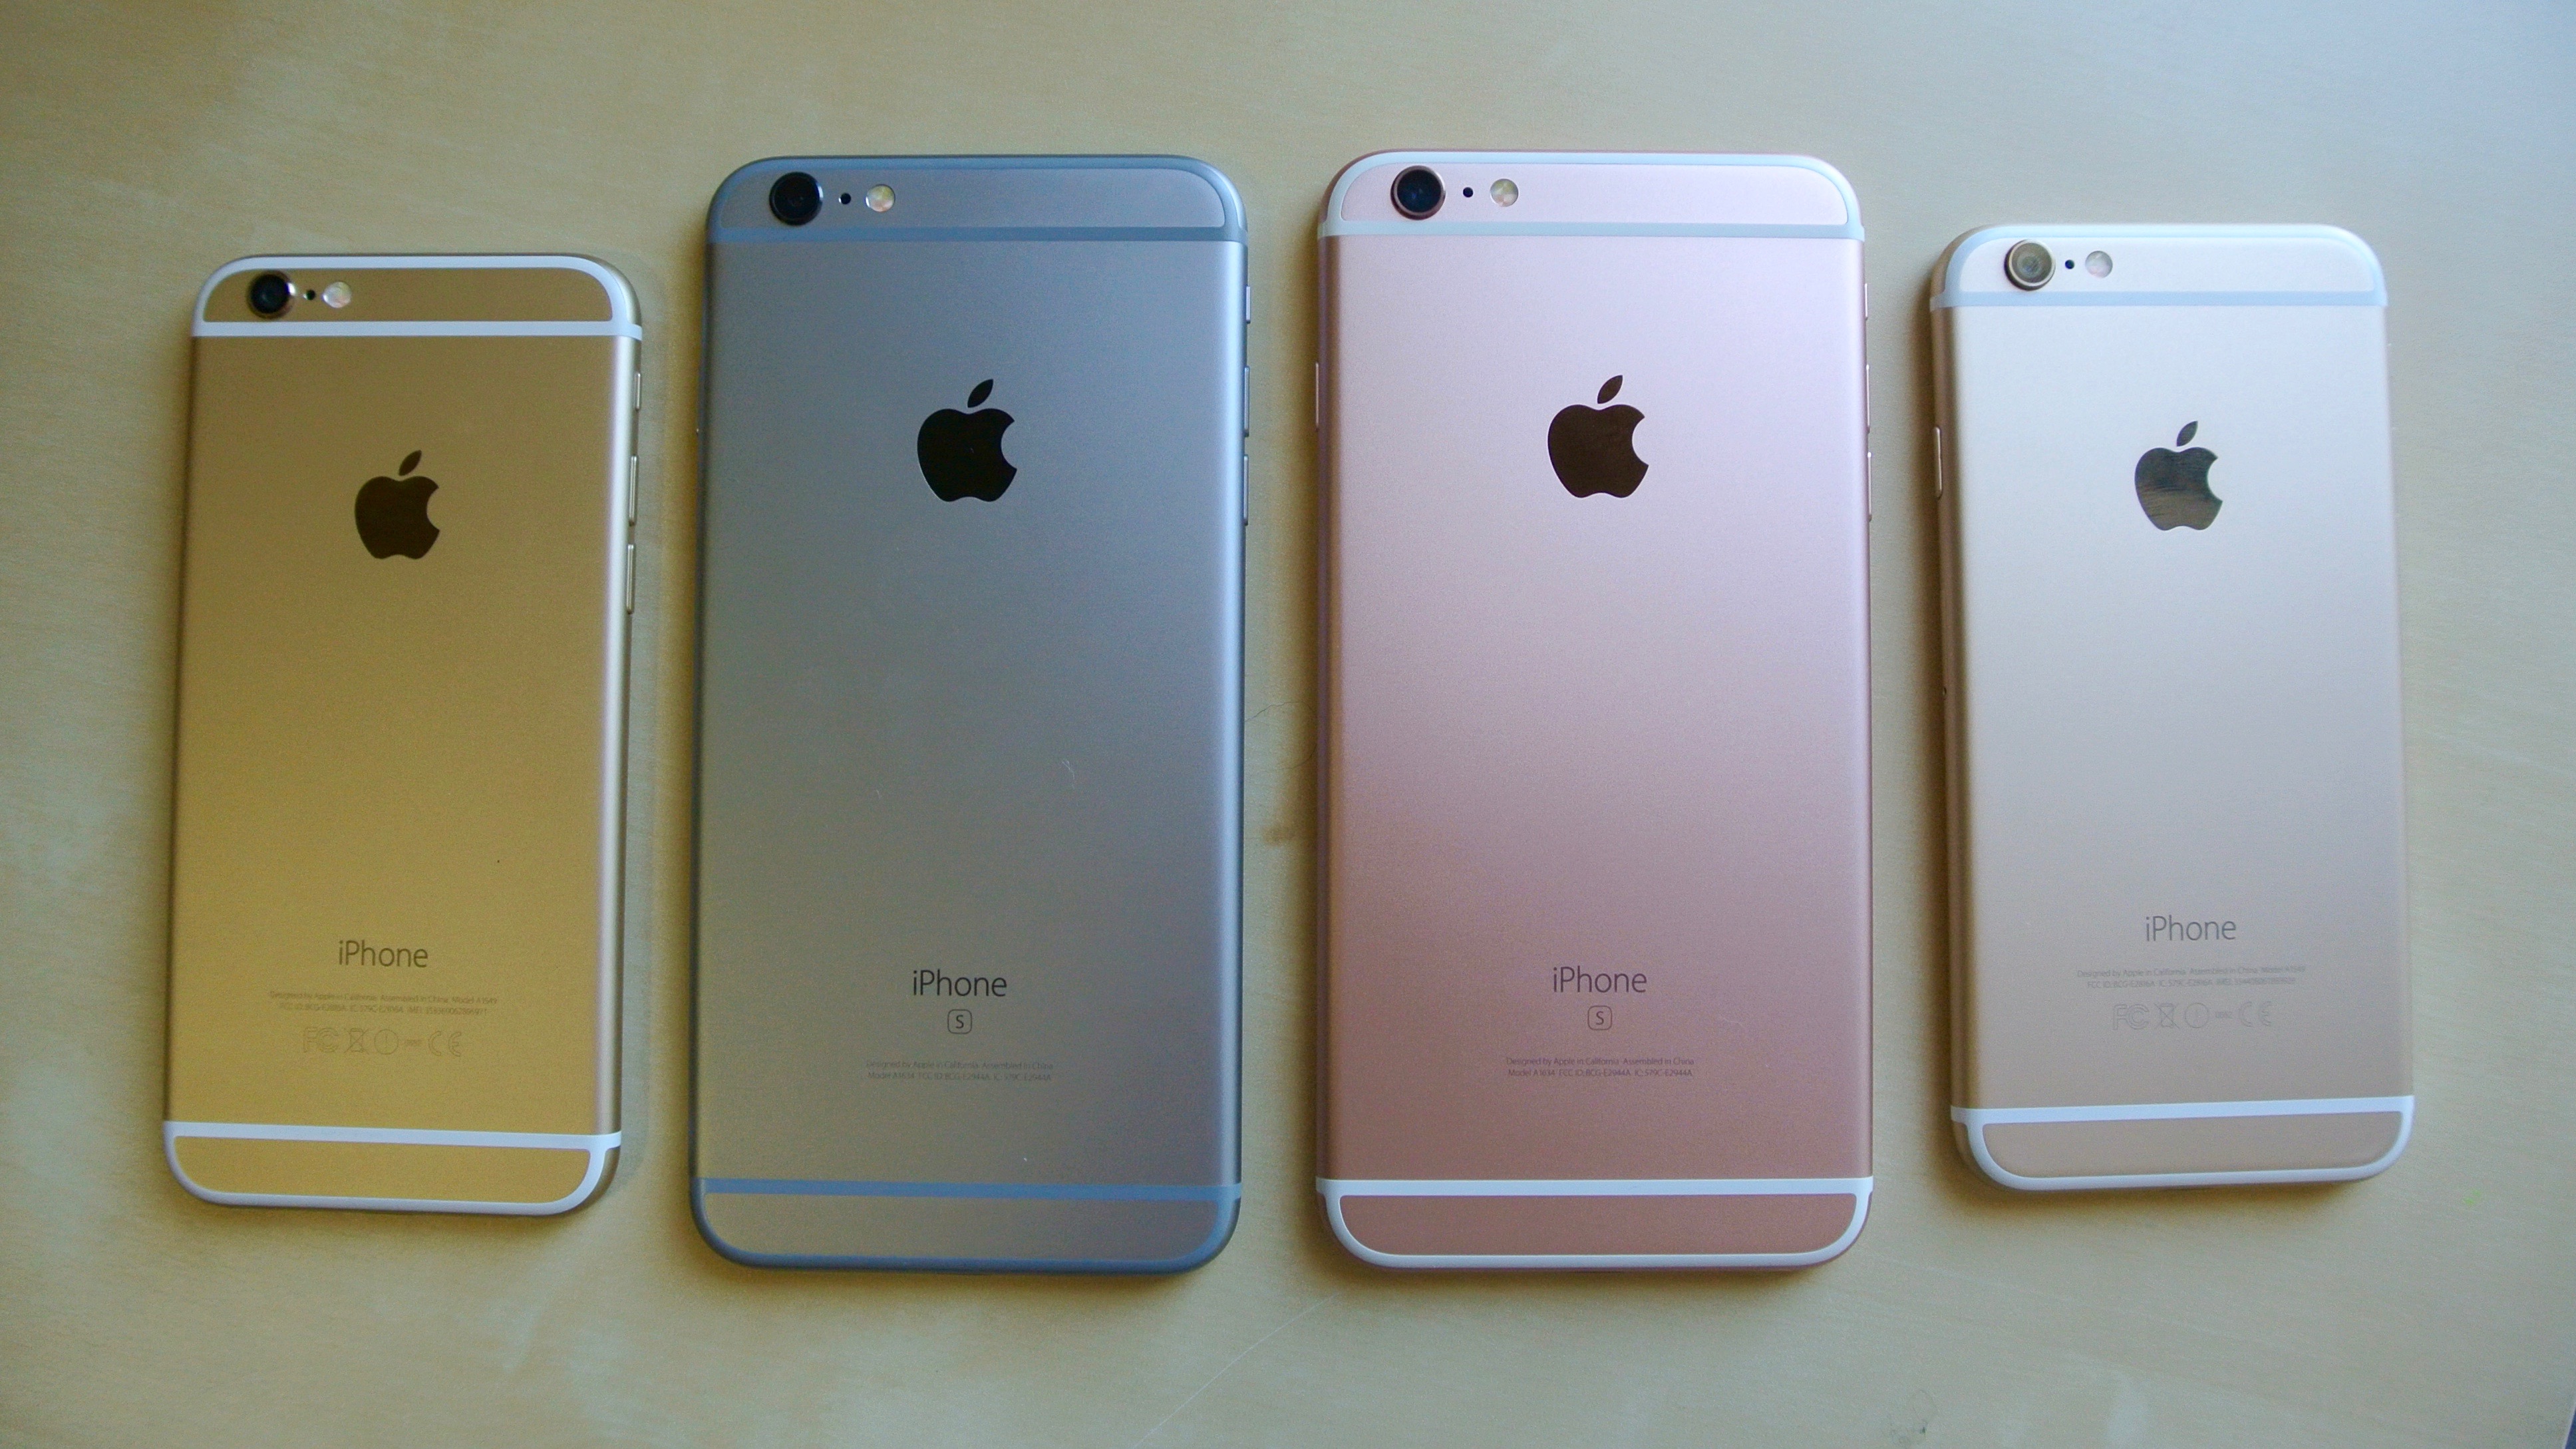 iPhone 6s Plus: first impressions with Gray + Gold [Gallery] - 9to5Mac